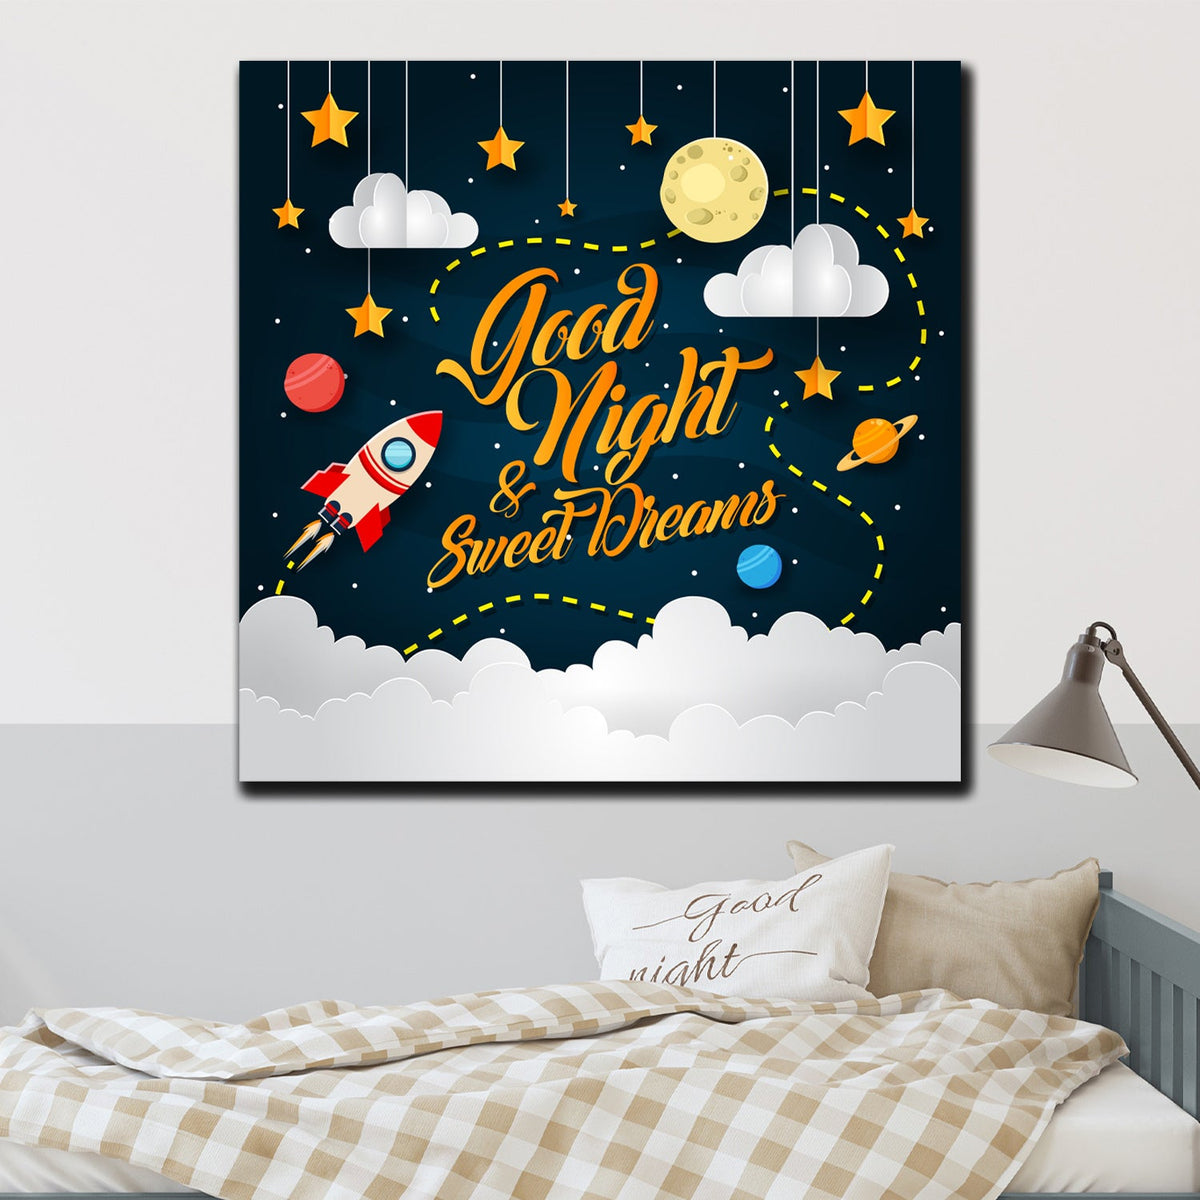 https://cdn.shopify.com/s/files/1/0387/9986/8044/products/GoodNight_SweetDreamsCanvasArtprintStretched-1.jpg